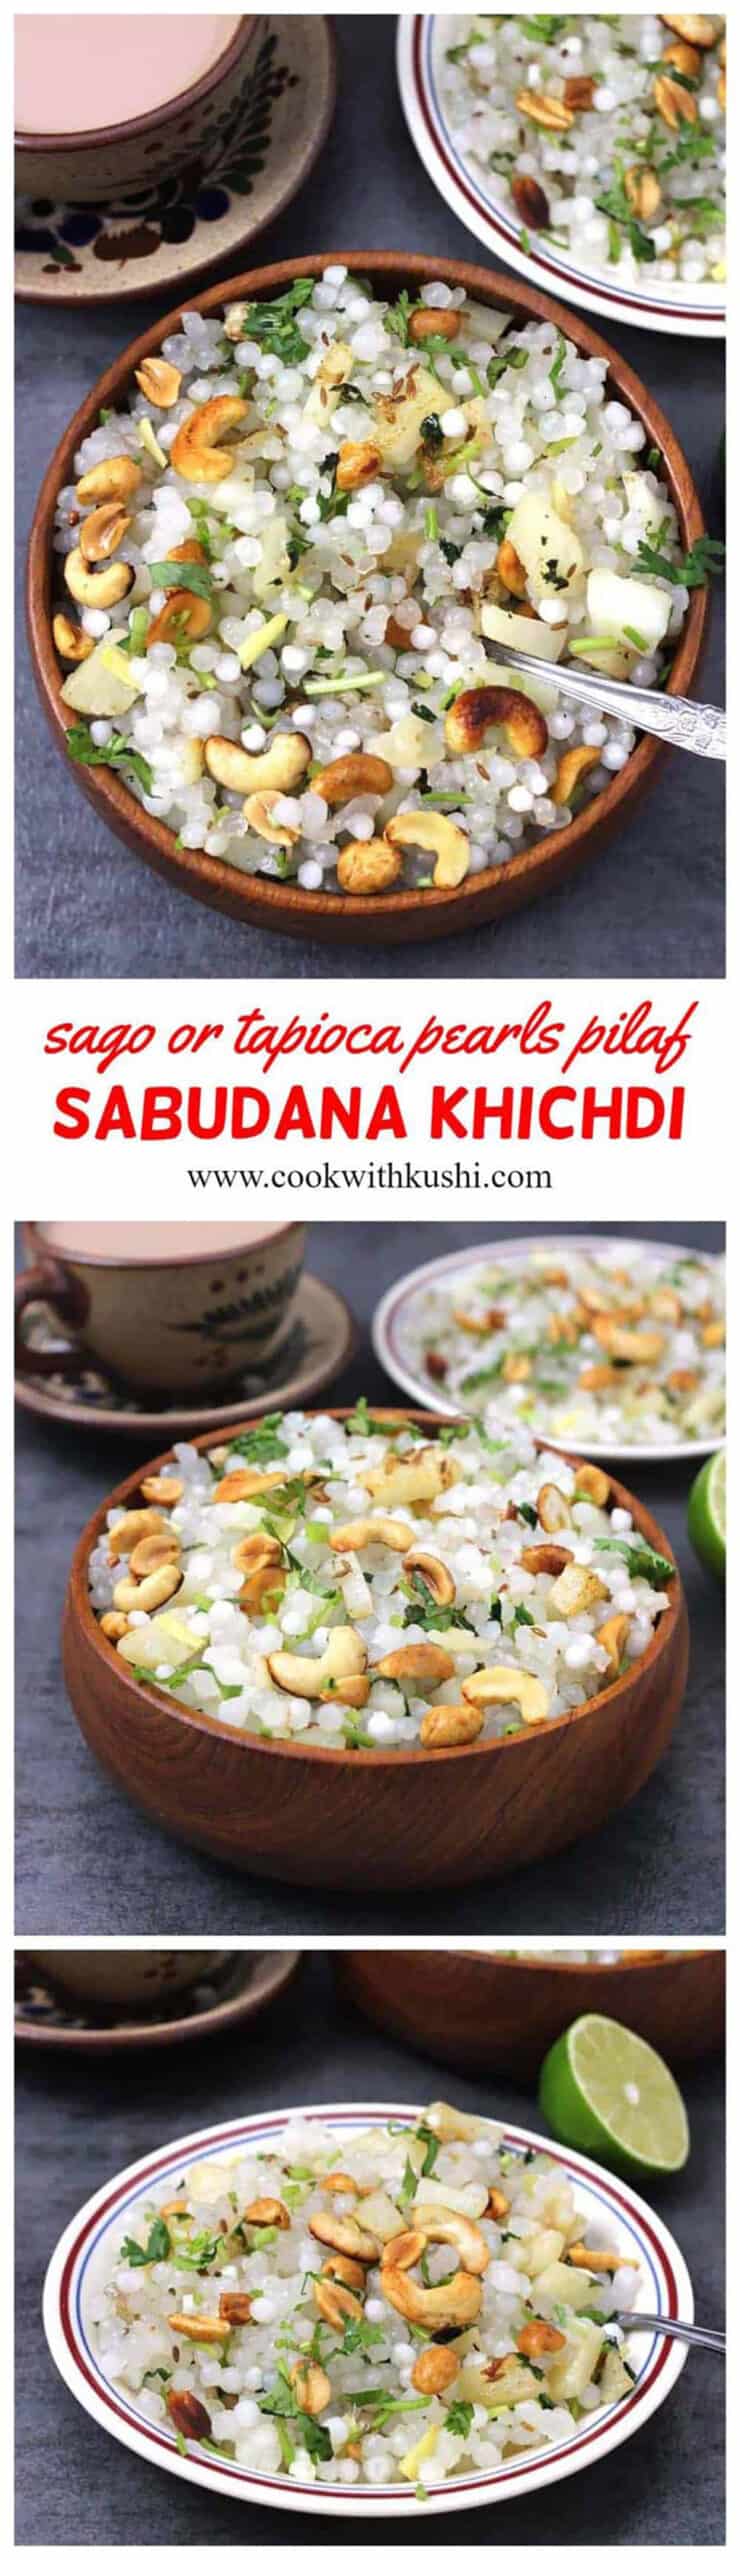 A collage of images showing sabudana khichdi.